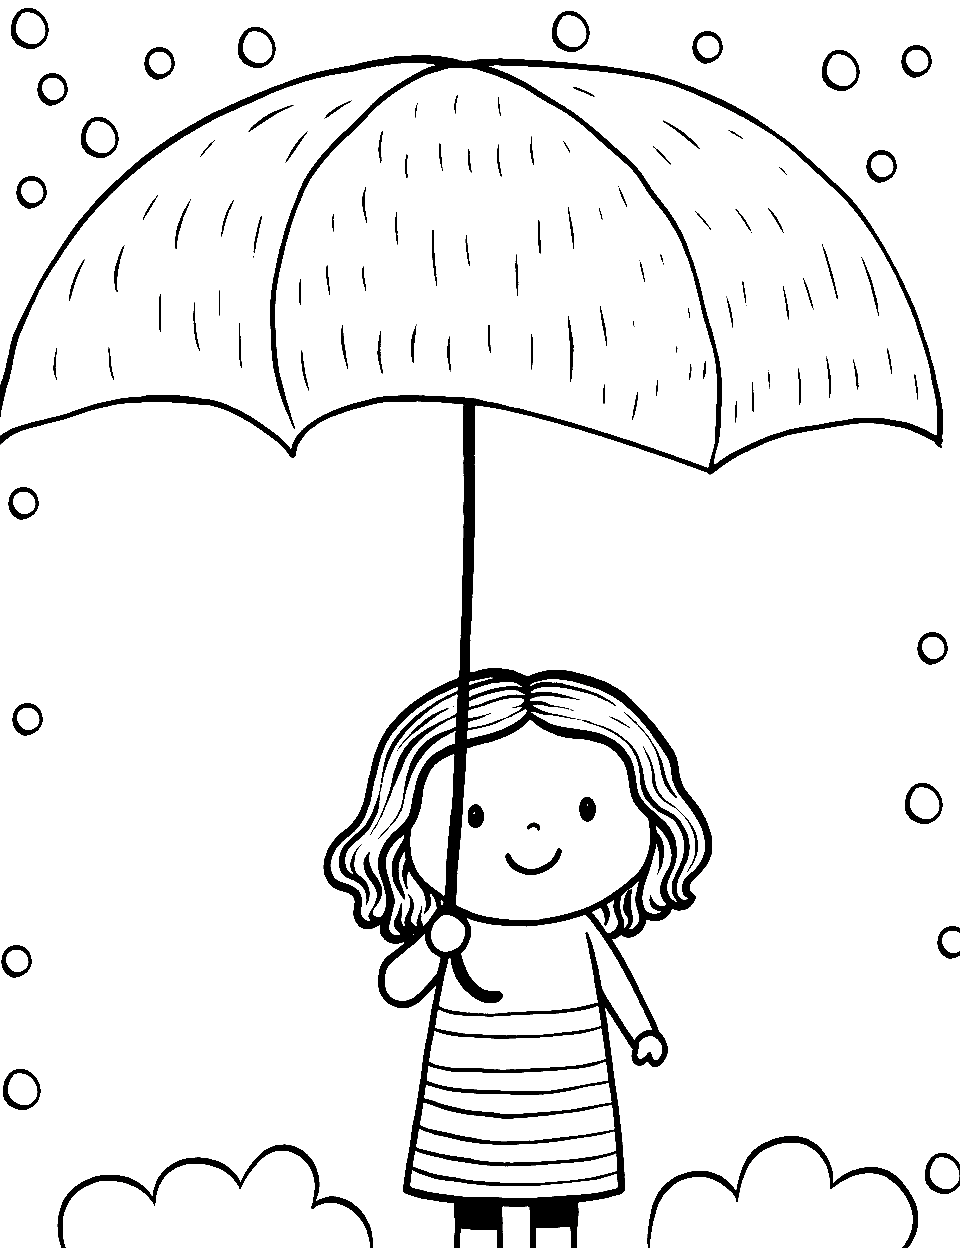 Umbrella Uplift Coloring Page - A child holding an umbrella in the rain.